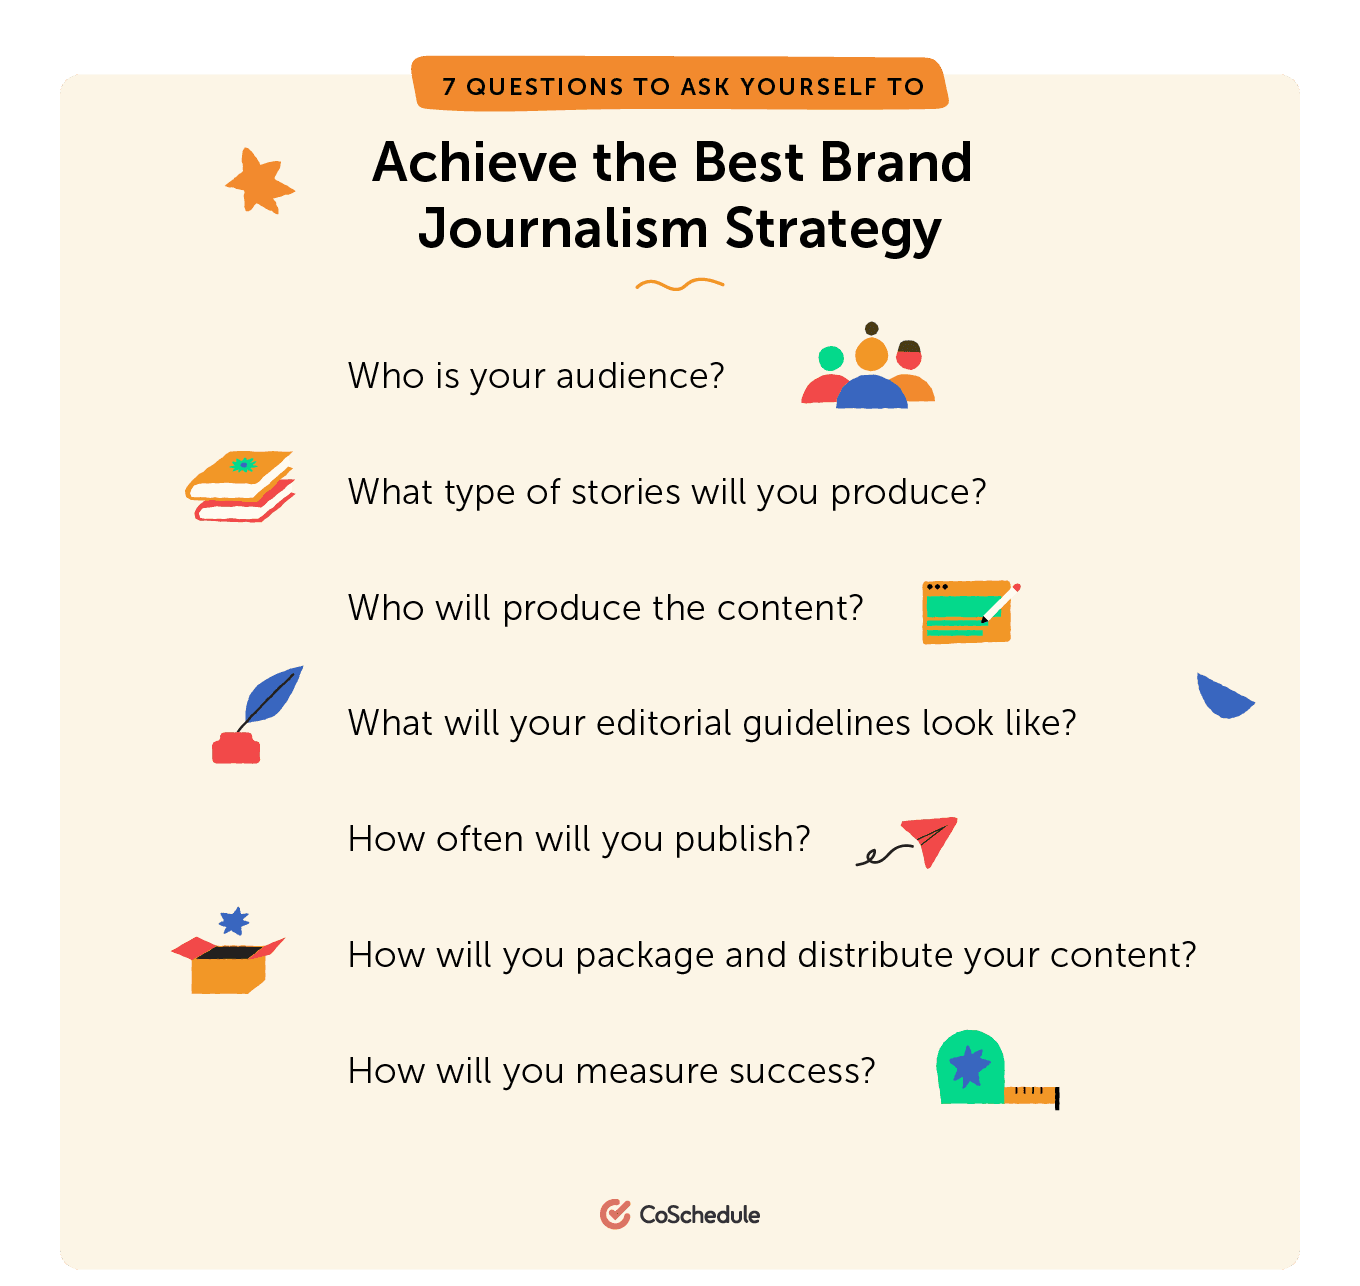 Questions to ask yourself about journalism strategy